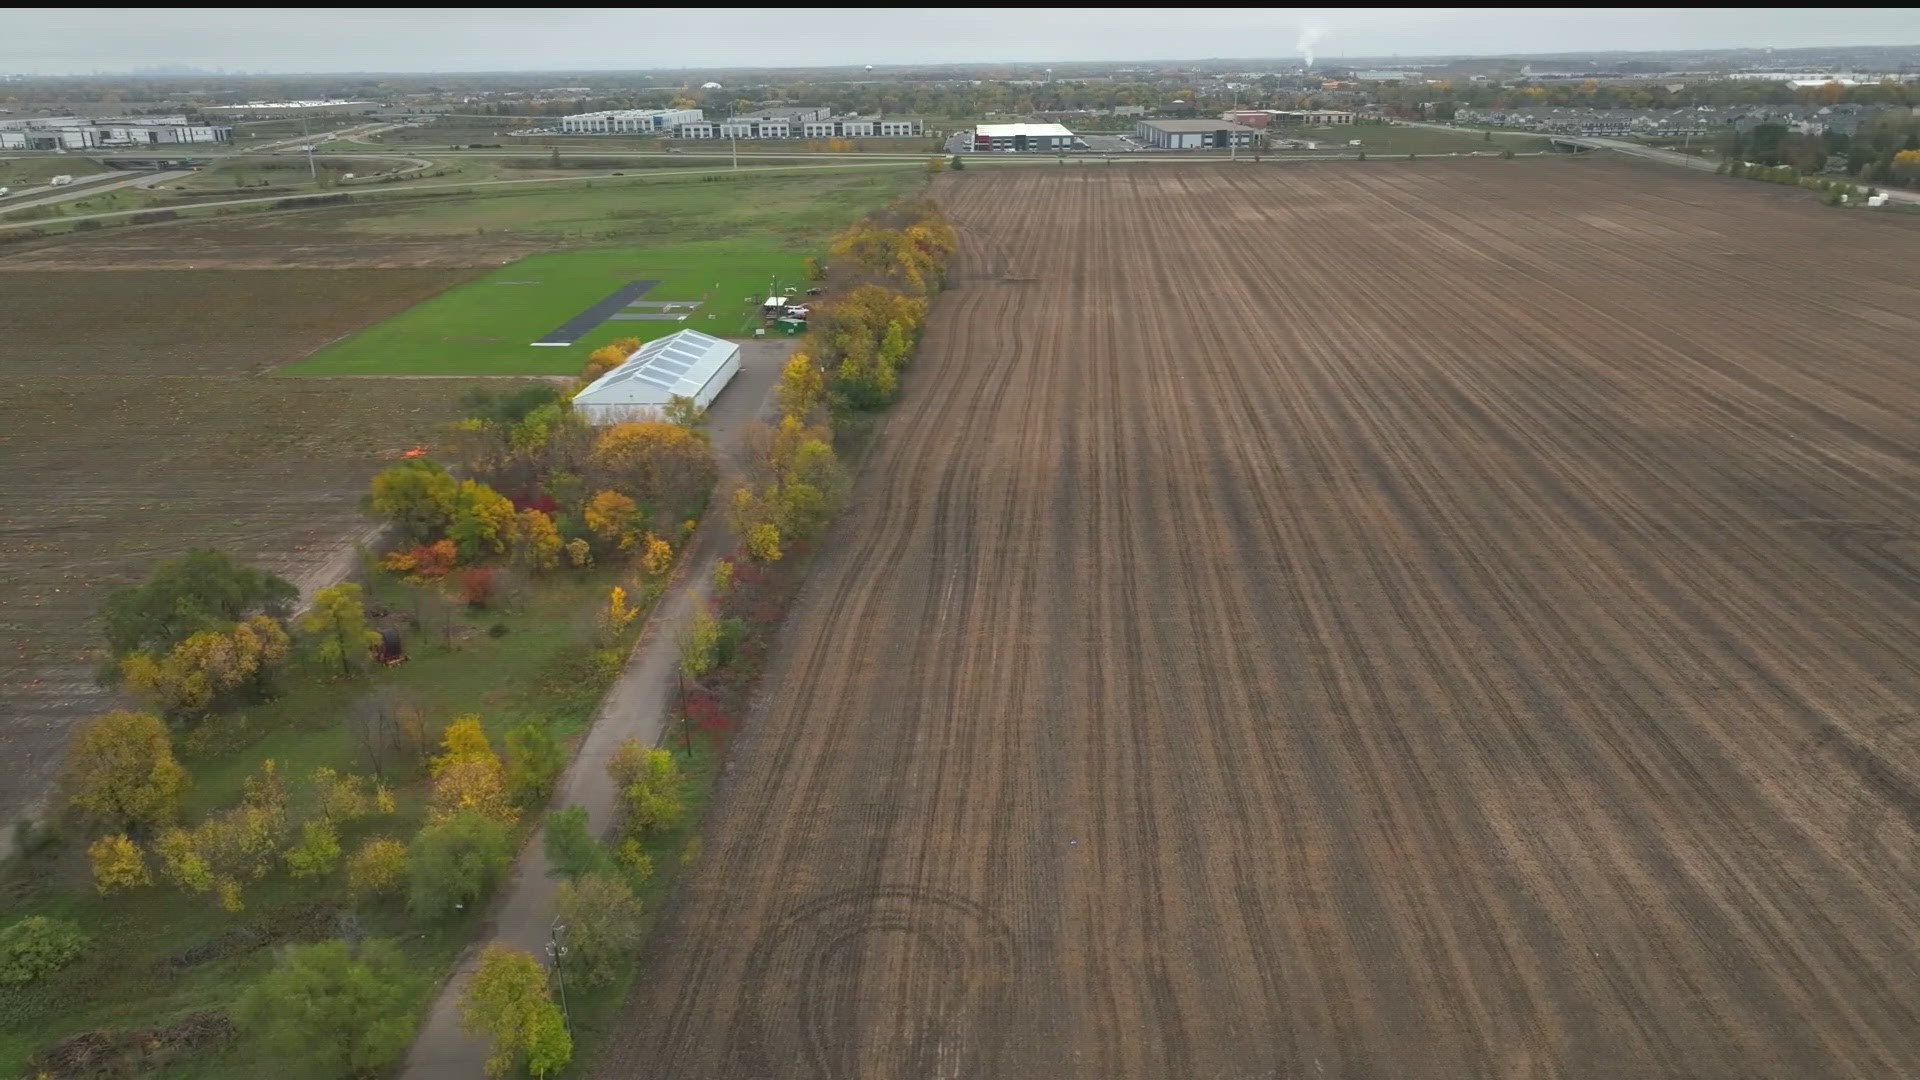 Work is underway to bring more diversity into Minnesota's farming community.